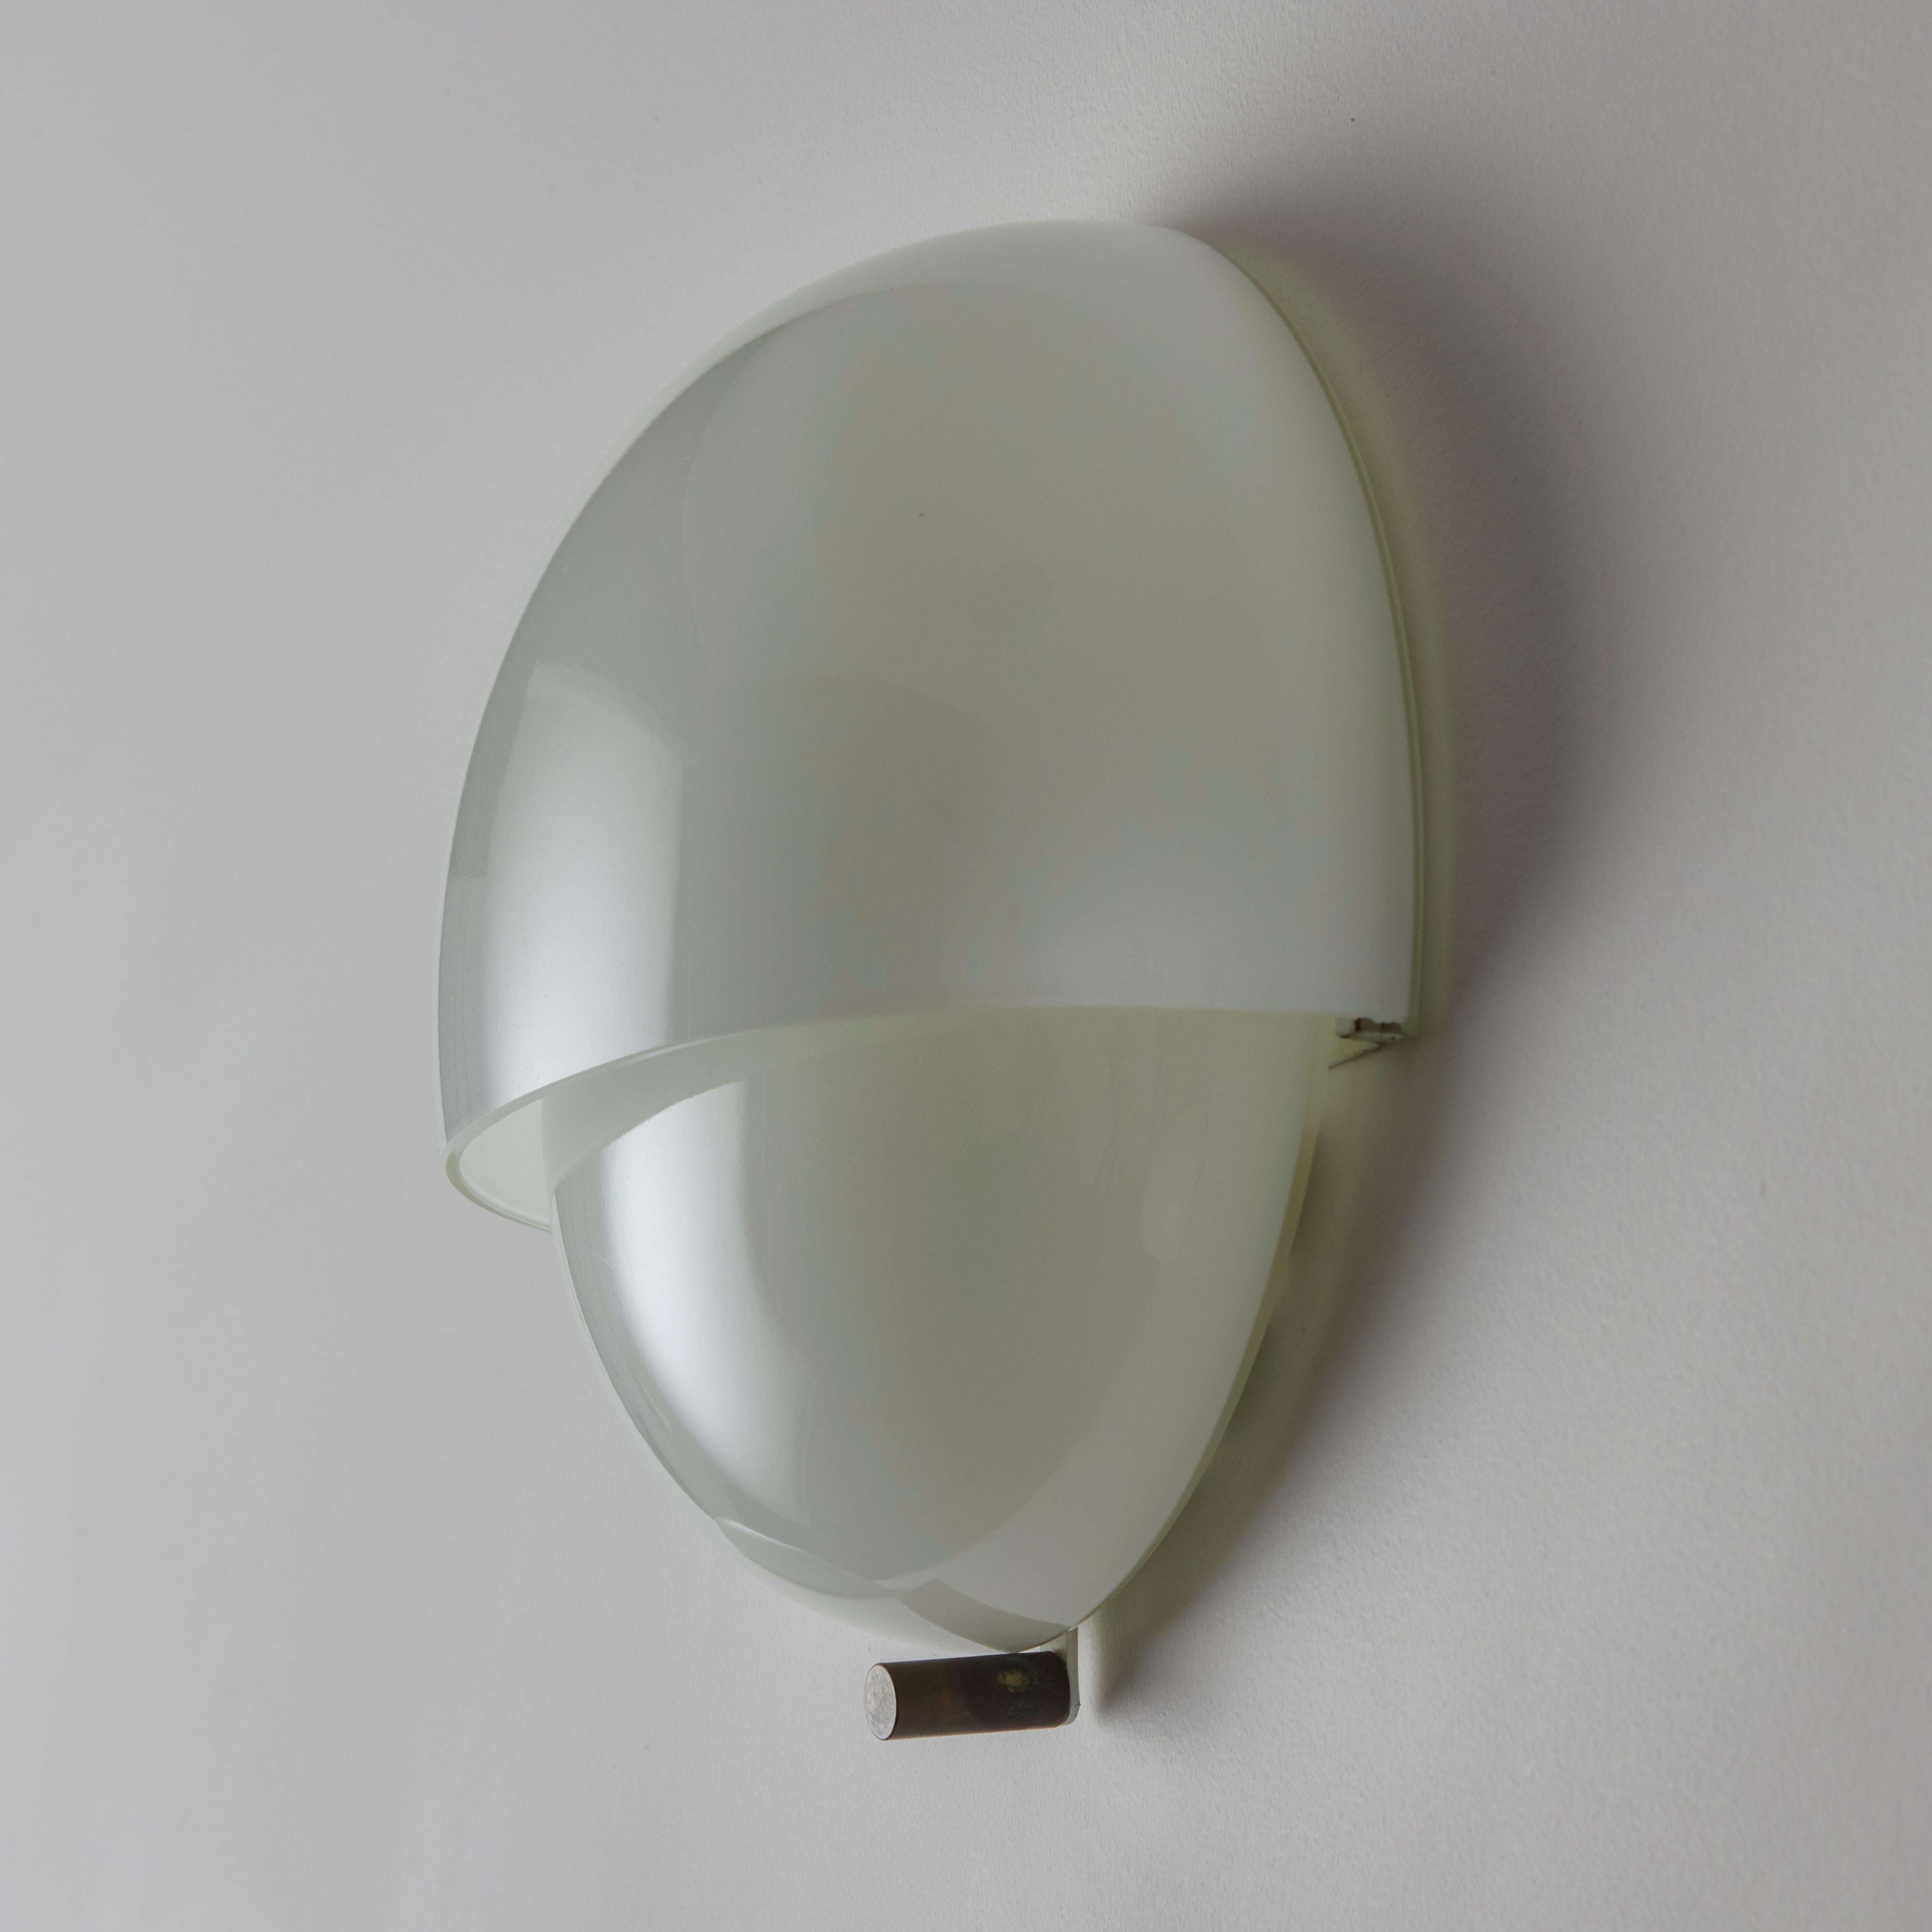 Mid-20th Century 'Mania' Sconces by Vico Magistretti for Artemide For Sale